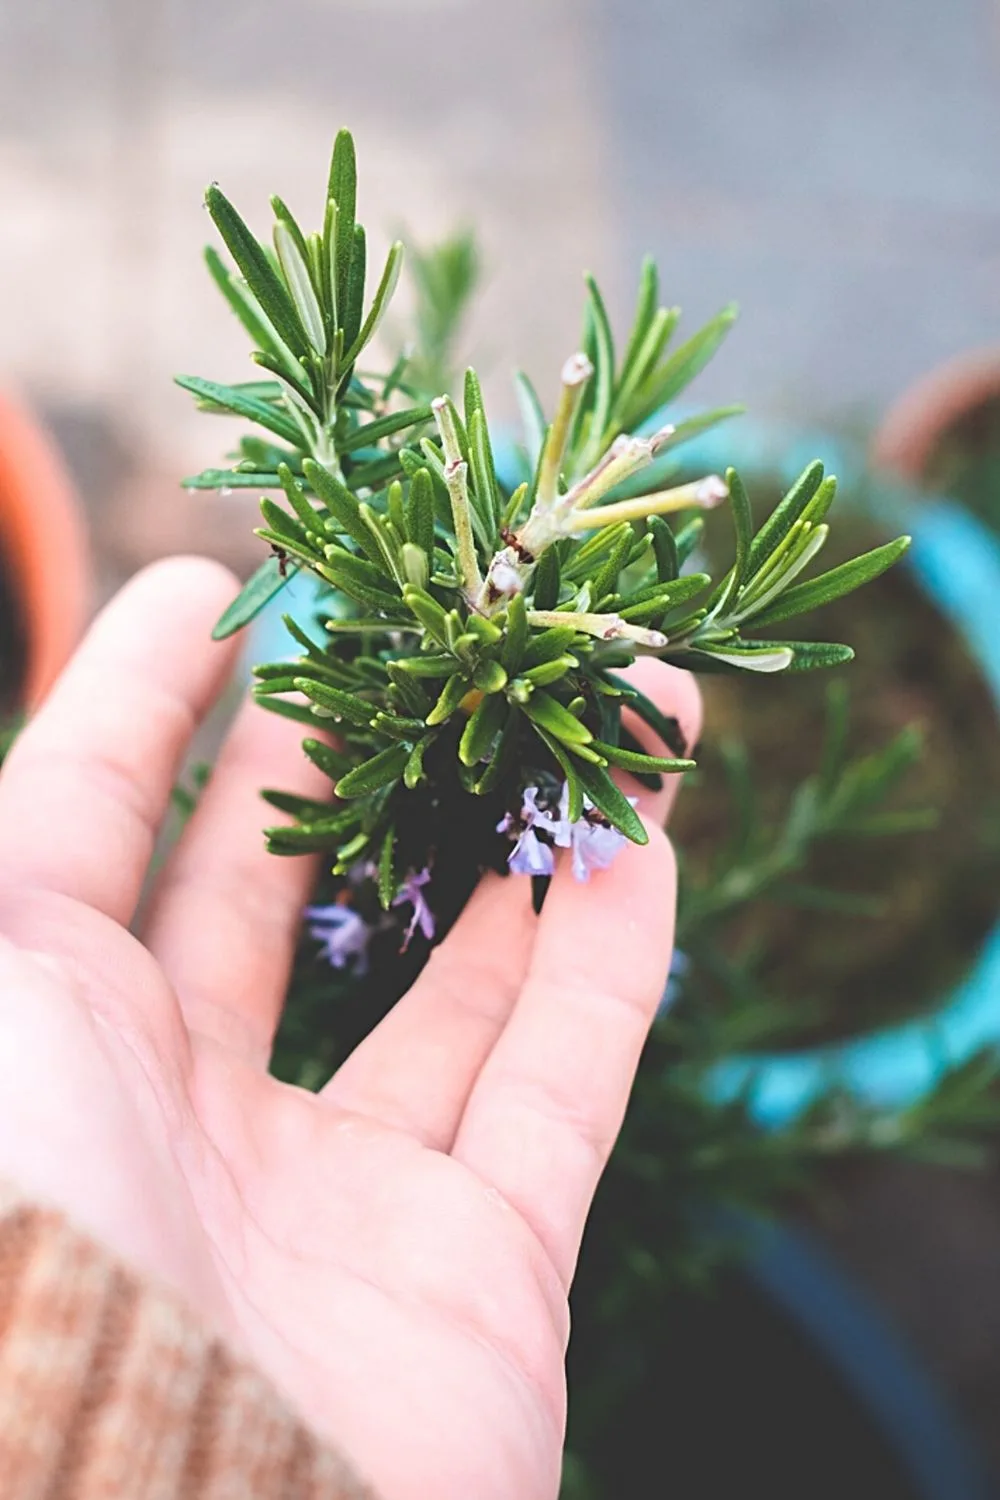 Rosemary is an evergreen shrub that you can grow on your south-facing balcony